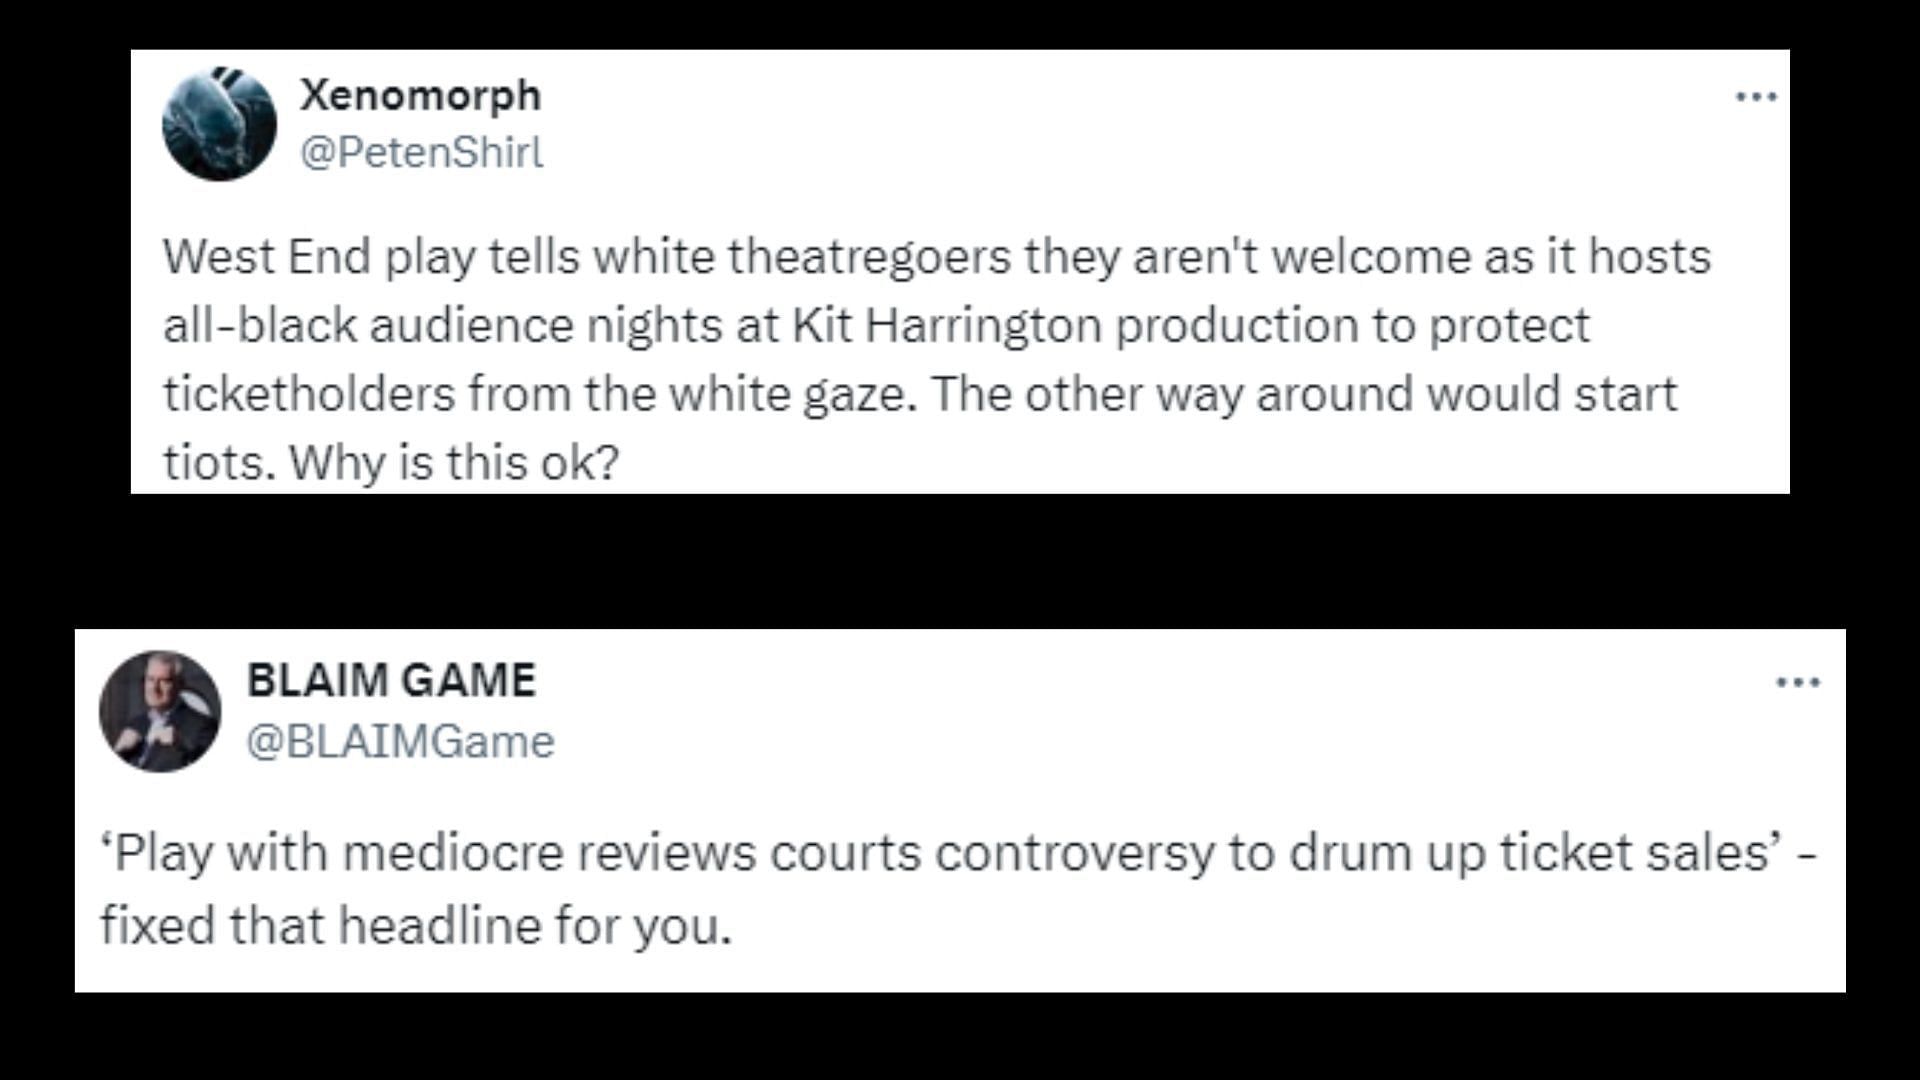 Netizens react to the theatre decision (Images via X/PetenShirl and BLAIMGame)